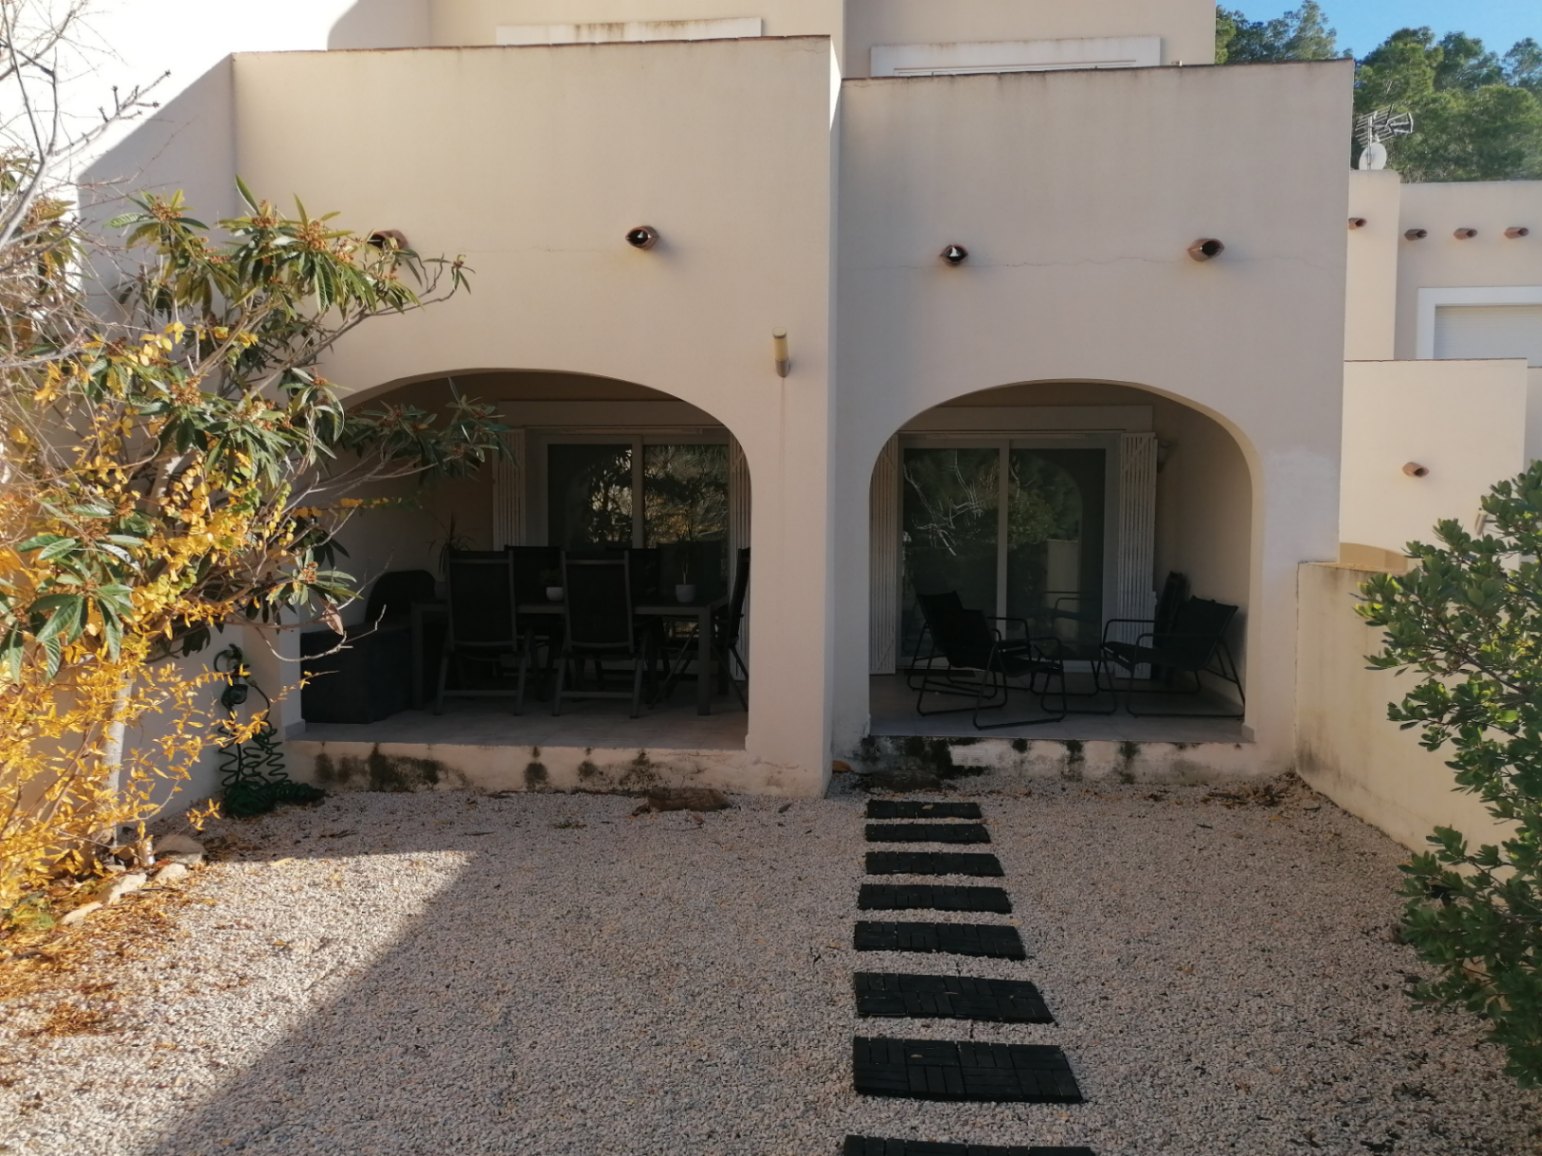 Semi-detached house for sale in Partida Empedrola Sup, 20 D